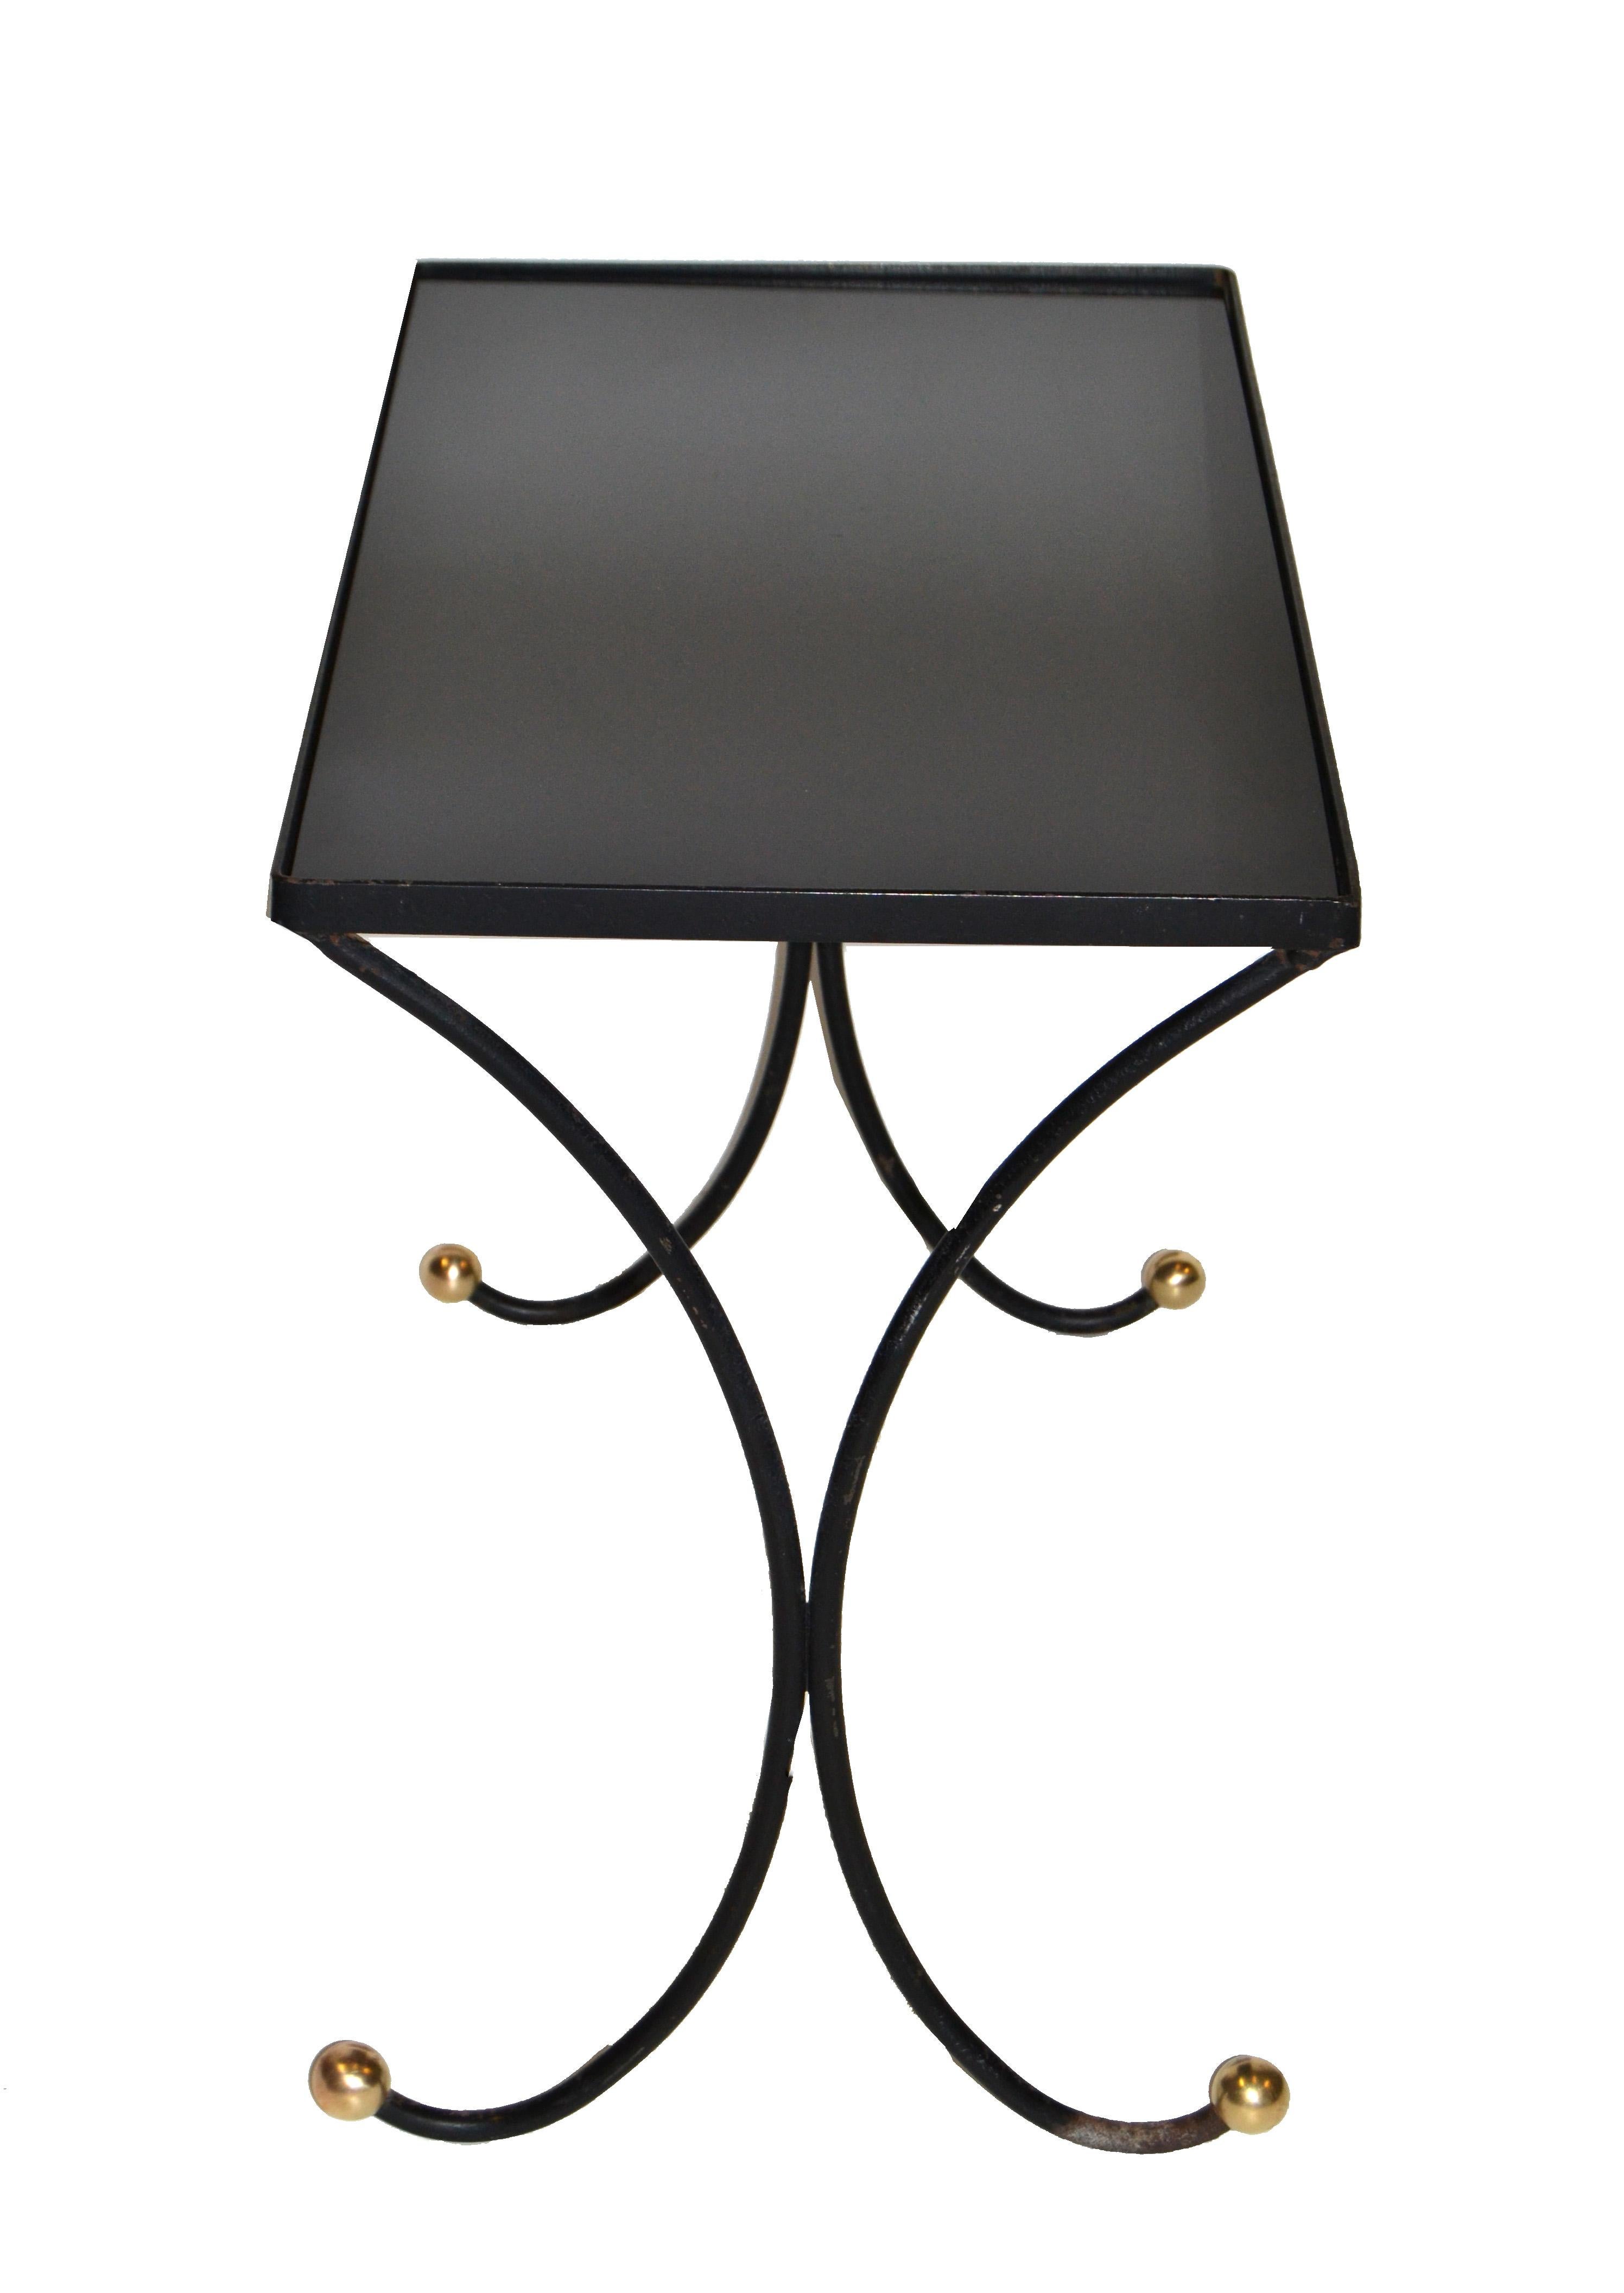 We offer this original 1950s ebonized wrought metal side table with round brass feet.
features a black glass top.
Is left in original condition with wear to the feet.